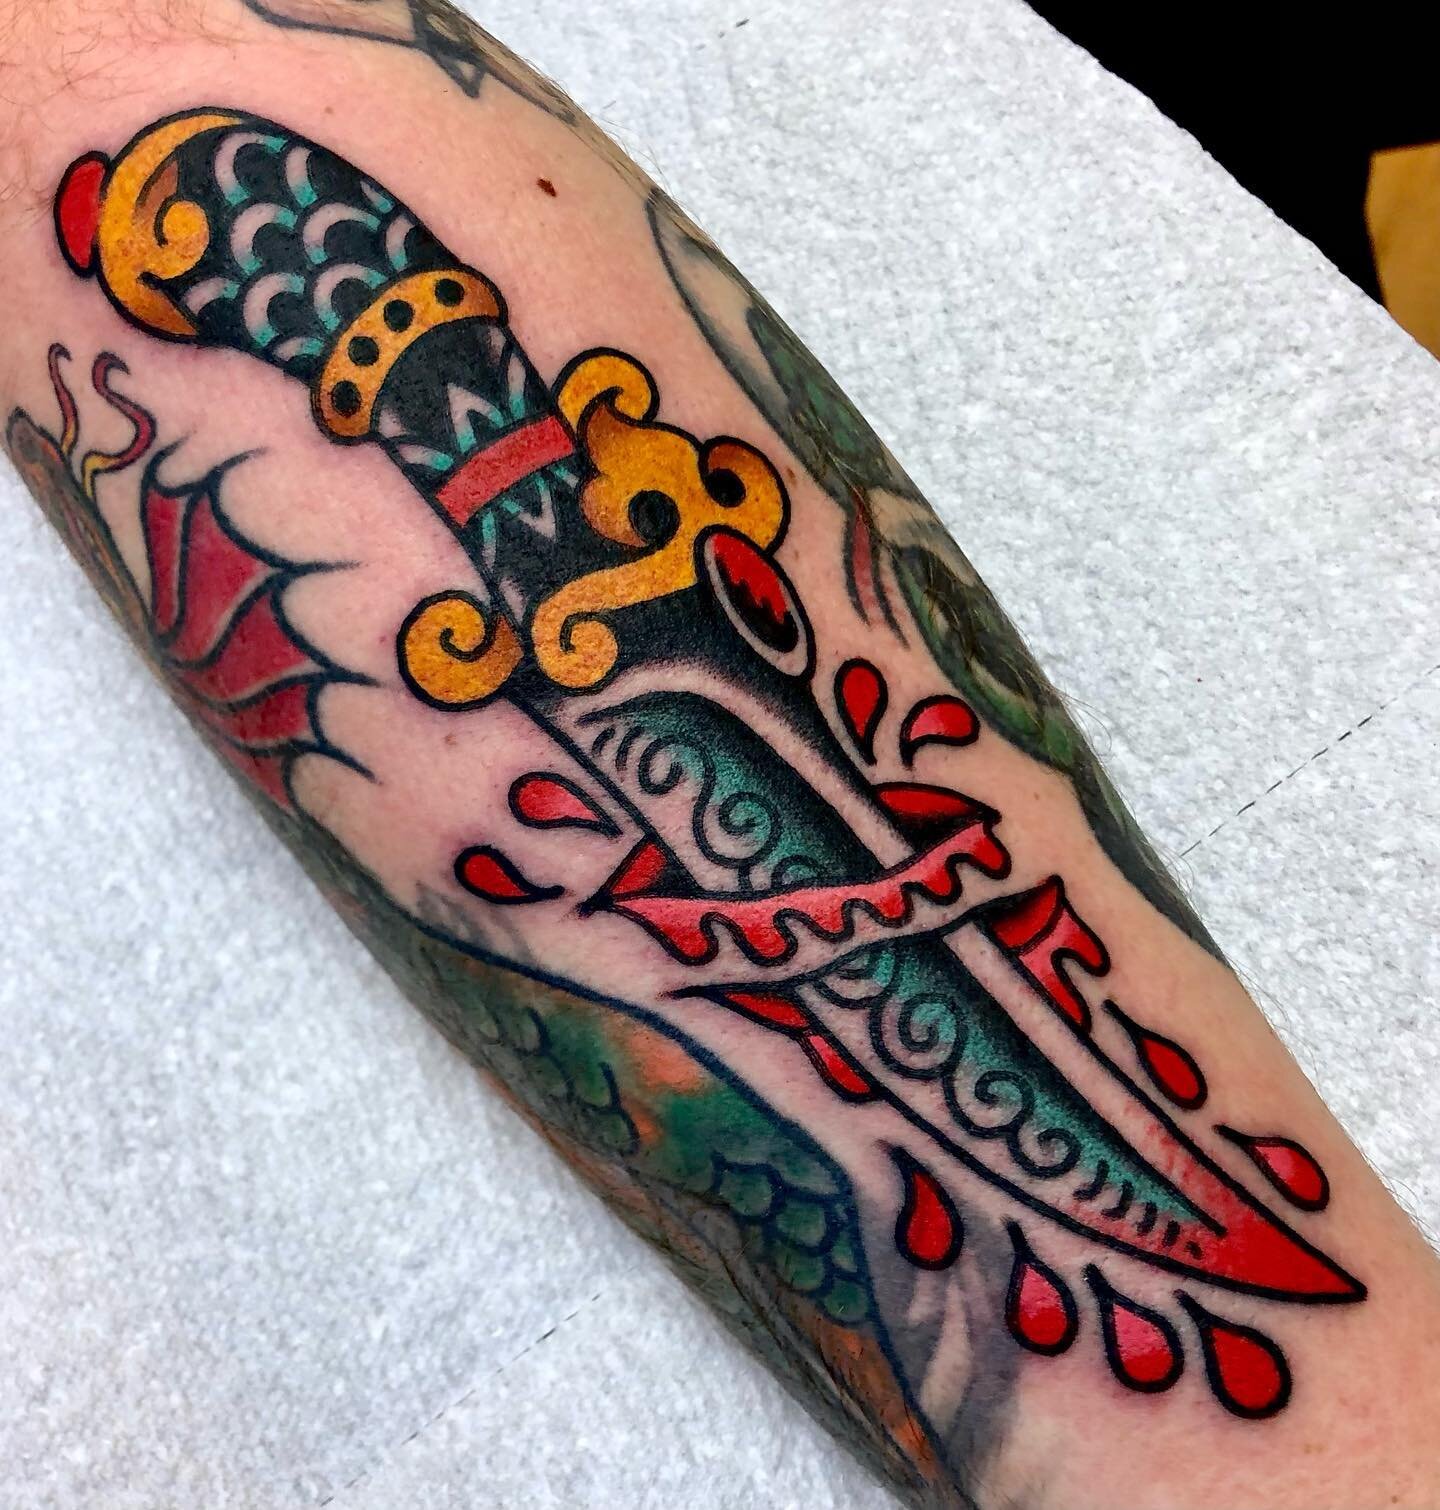 I love tattooing daggers. Thank you for looking!! #tattoo #tattoos #traditionaltattoos #bright_and_bold #skinart #oldlines #oldschooltattoo #traditionalclub #tattooing #tattooart #tradworkers #tradtattoo #tradwork #americantraditional #besttradtattoo